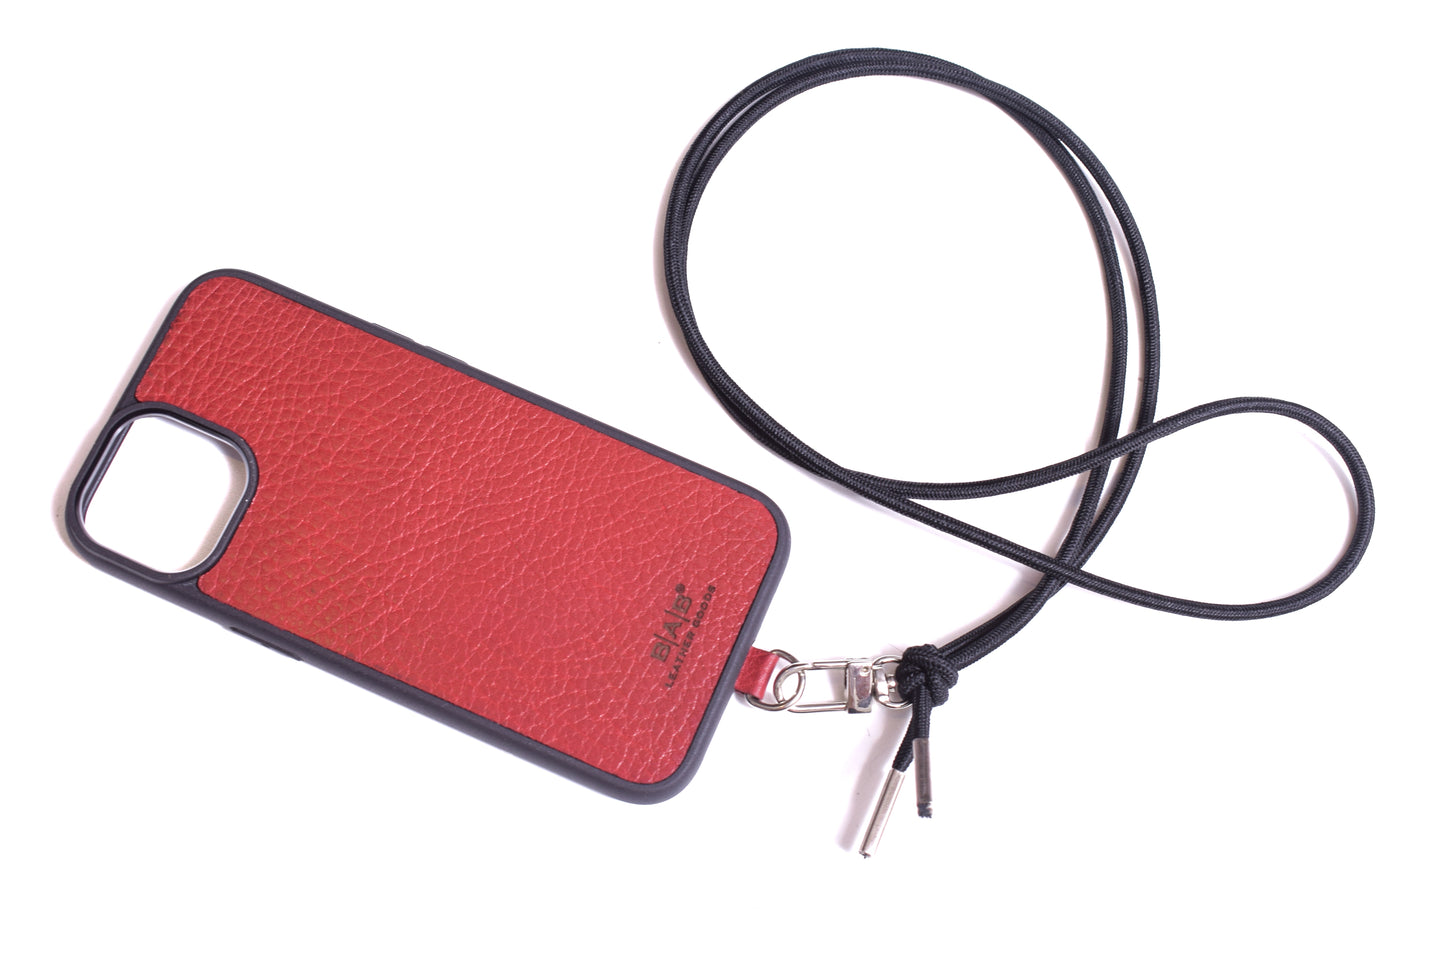 Full-Grain vegetable-tanned Genuine Leather iPhone Case and Support & Black Elastic Rope Bracelet/Crossbody/Necklace.- SCI52